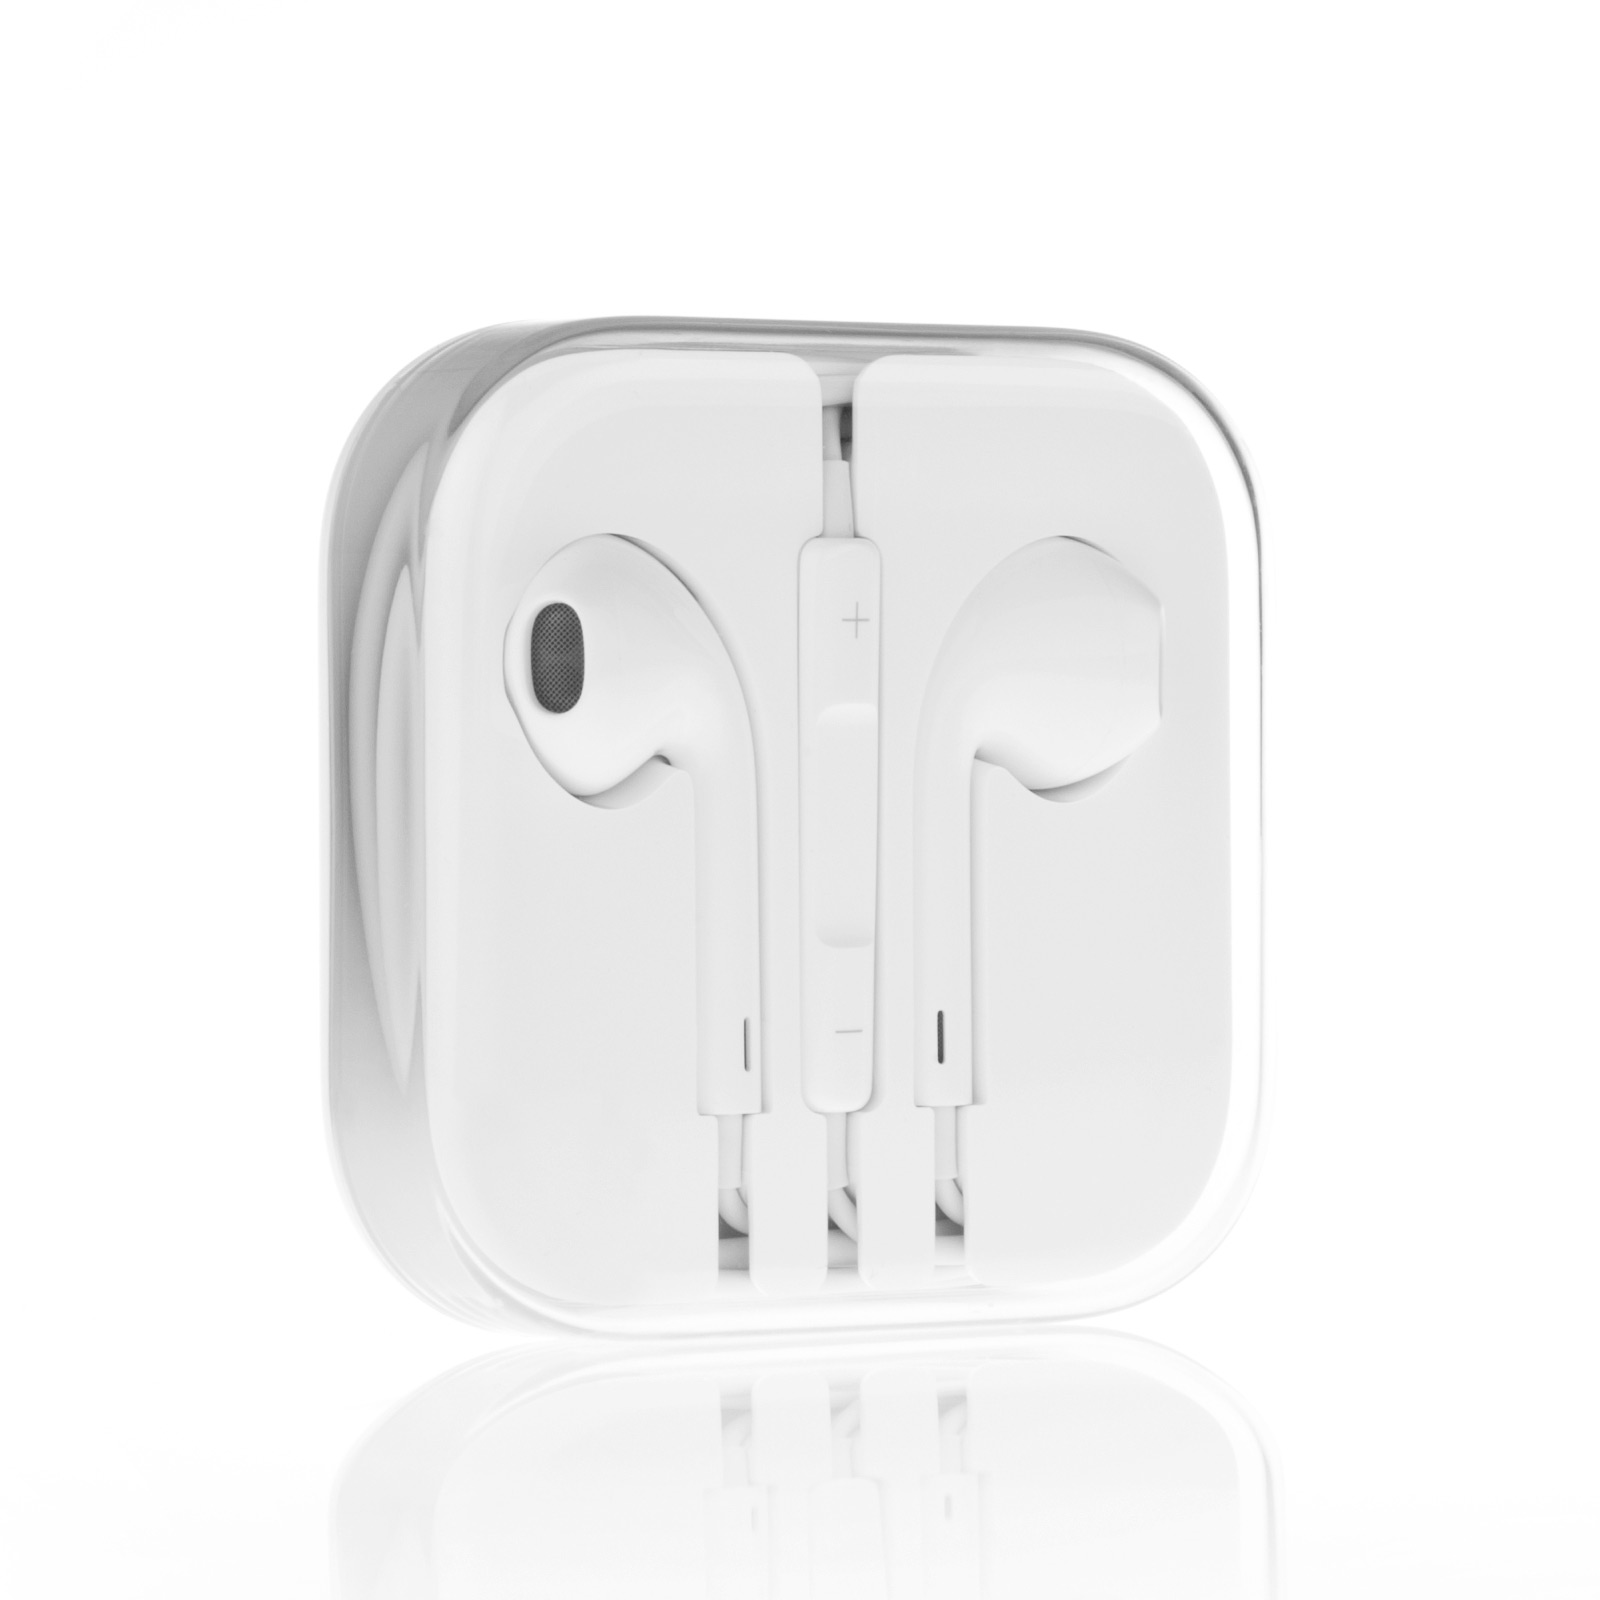 Official Apple EarPods Earphones with Remote and Mic 